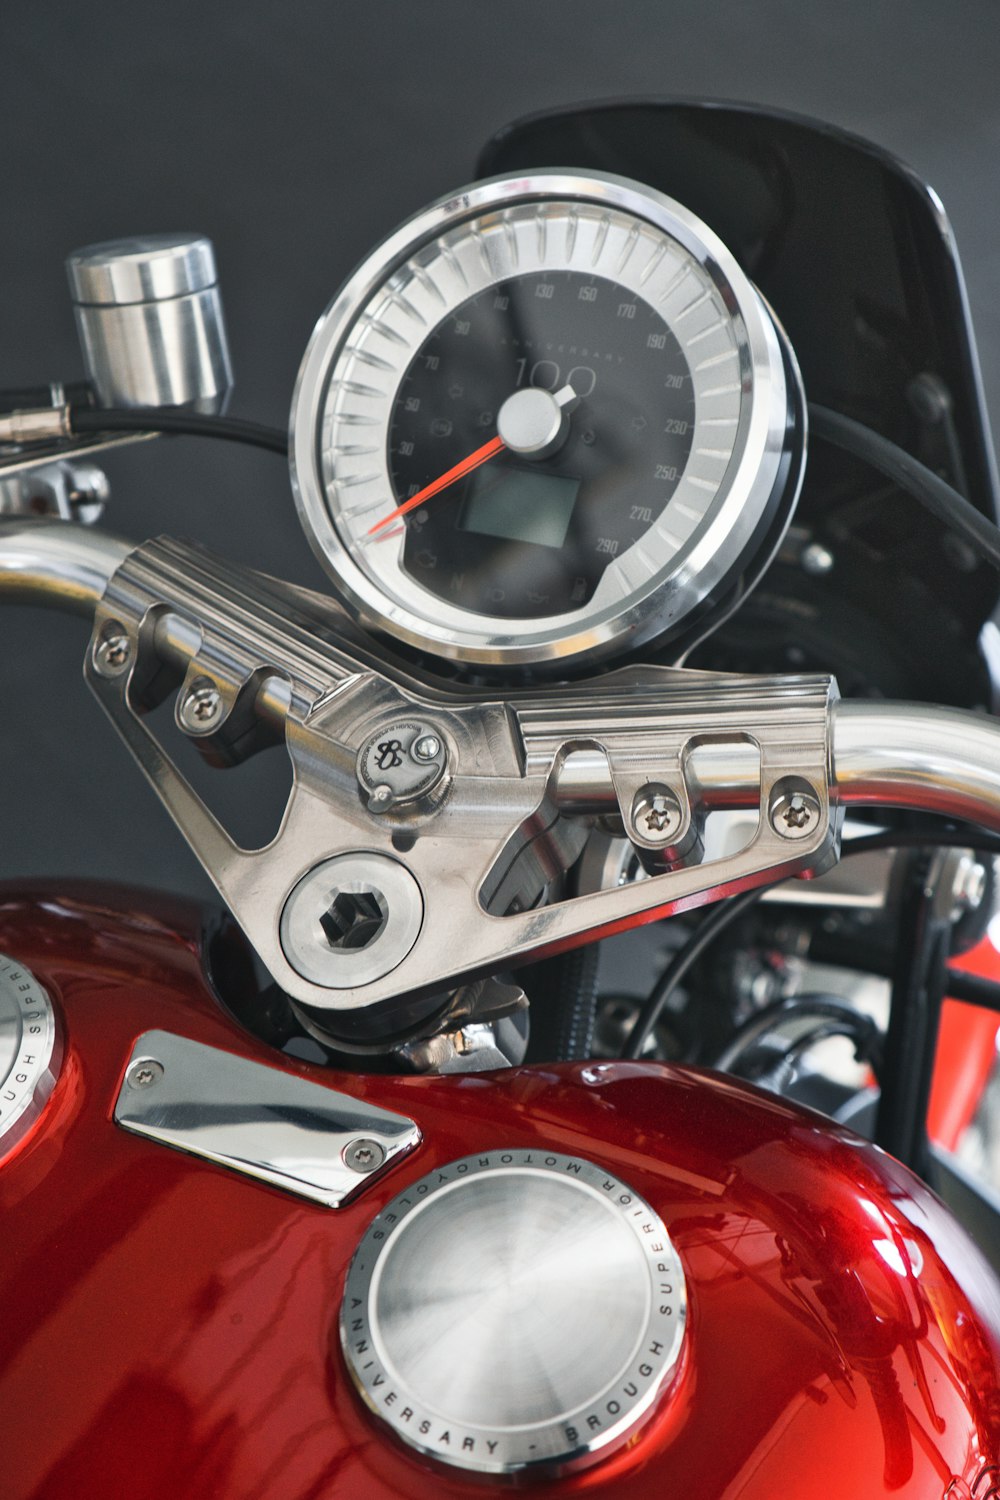 a close up of a motorcycle with a speedometer